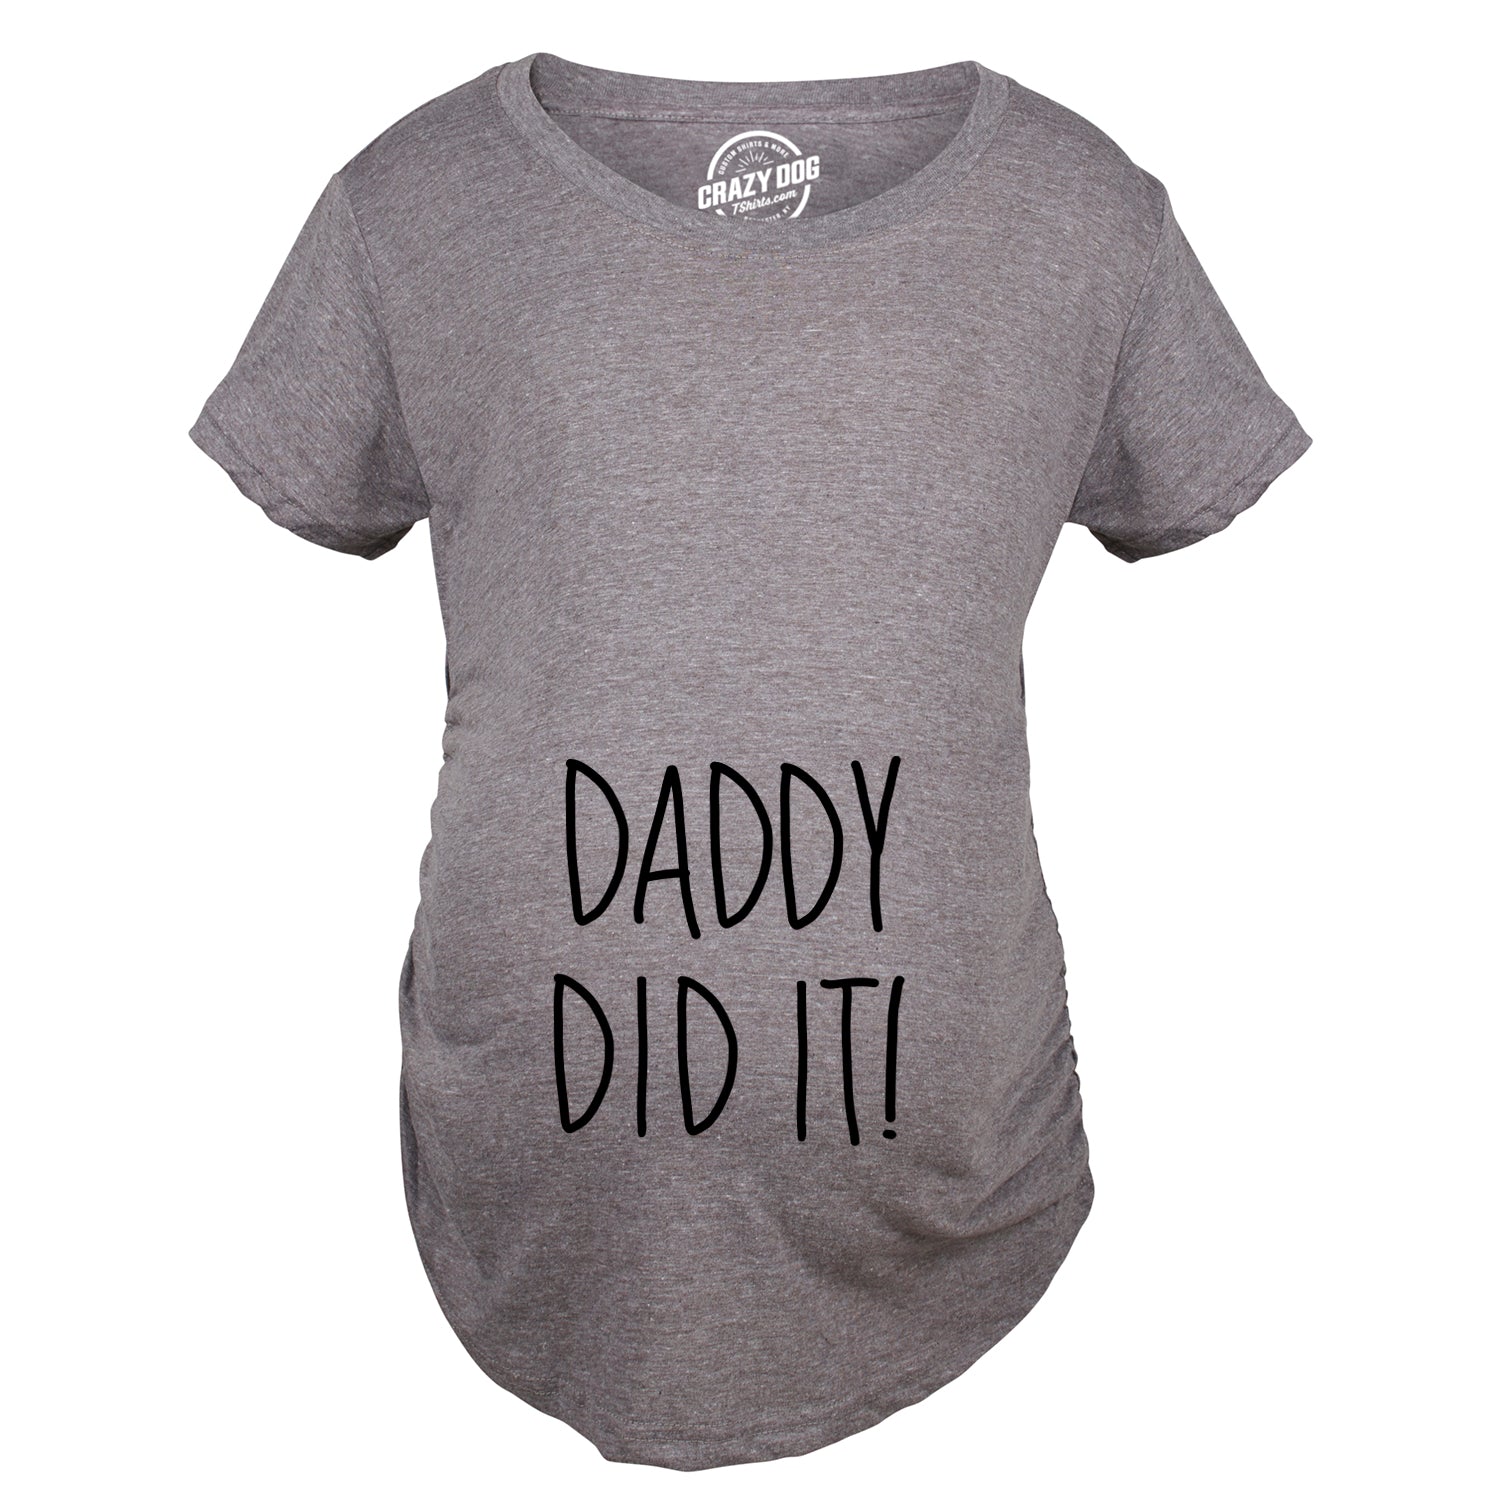 Maternity Daddy Did It T shirt Funny Pregnancy Announcement Gender Rev –  Nerdy Shirts